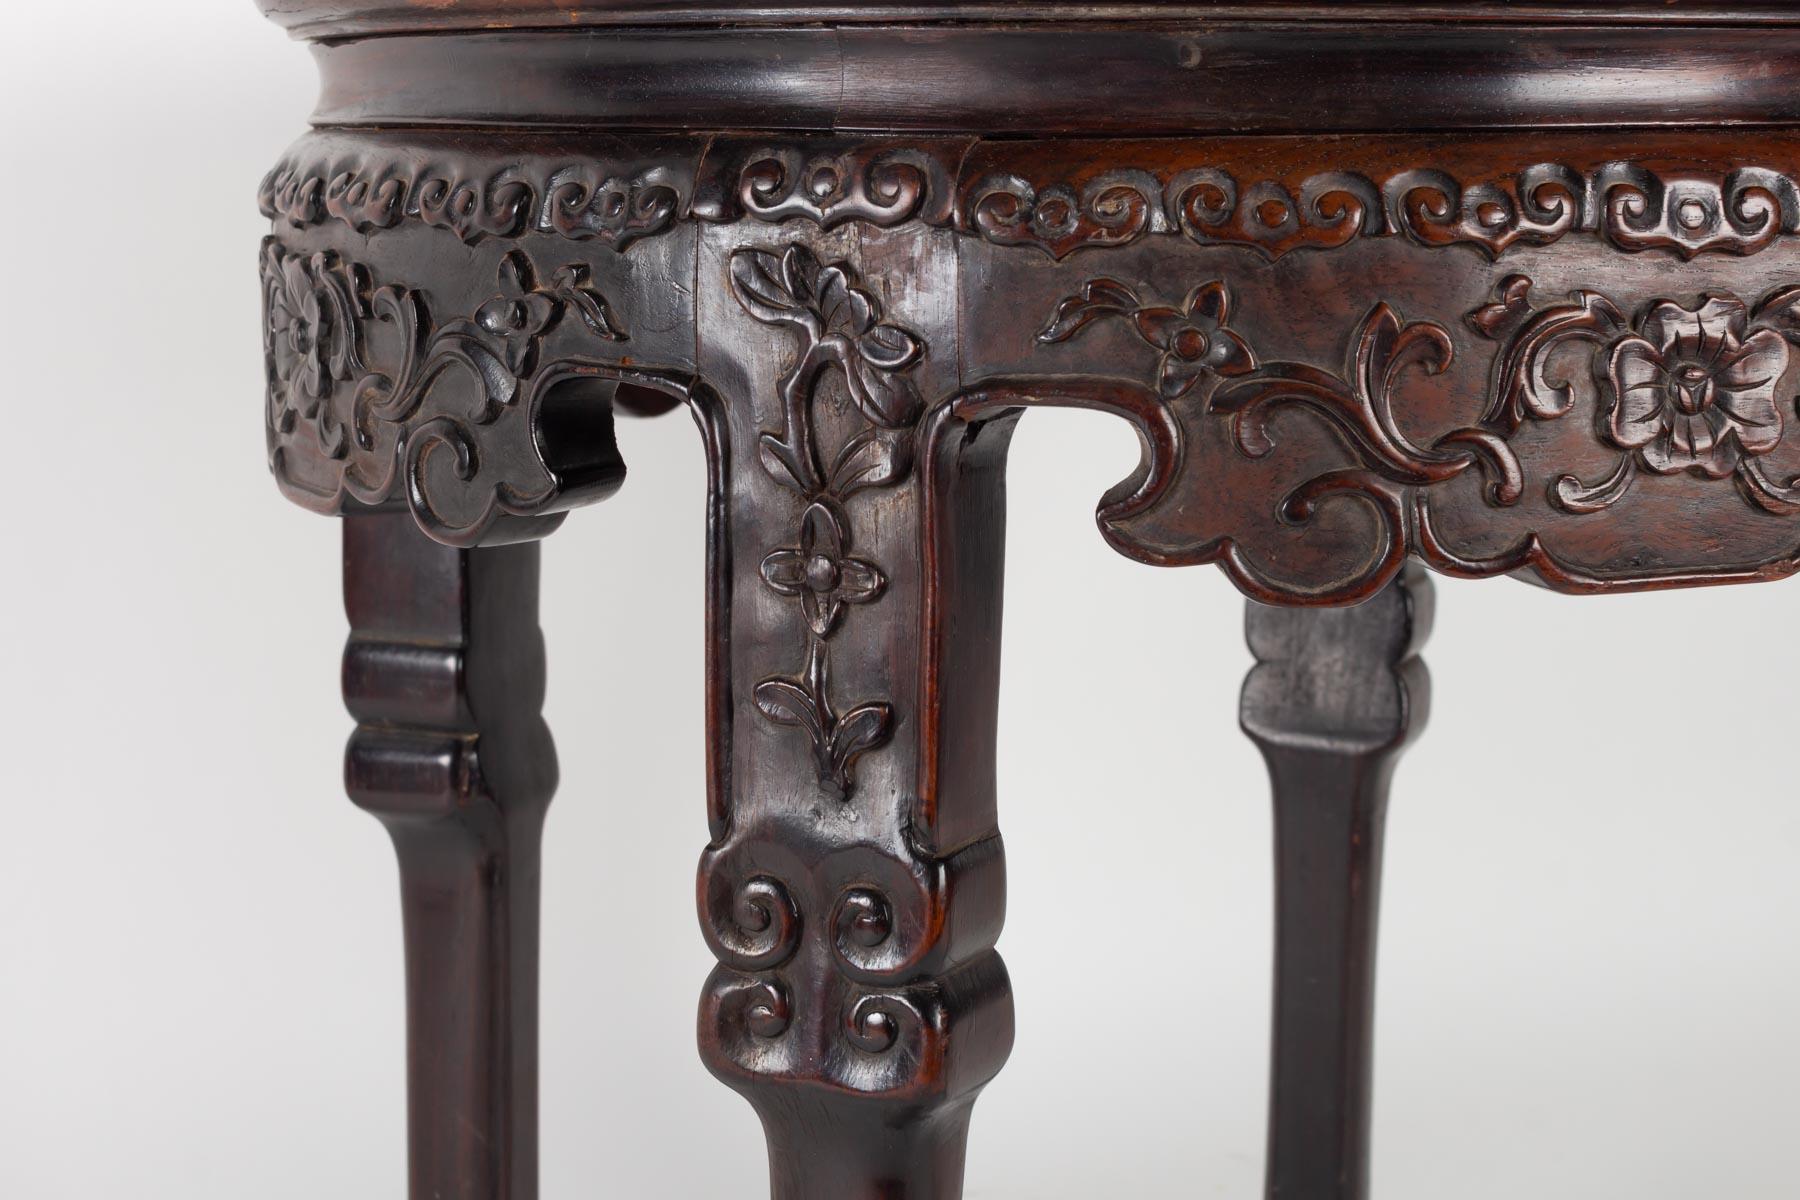 Chinese Small Exotic Wooden Table Very Dense Carved with Floral Patterns, China